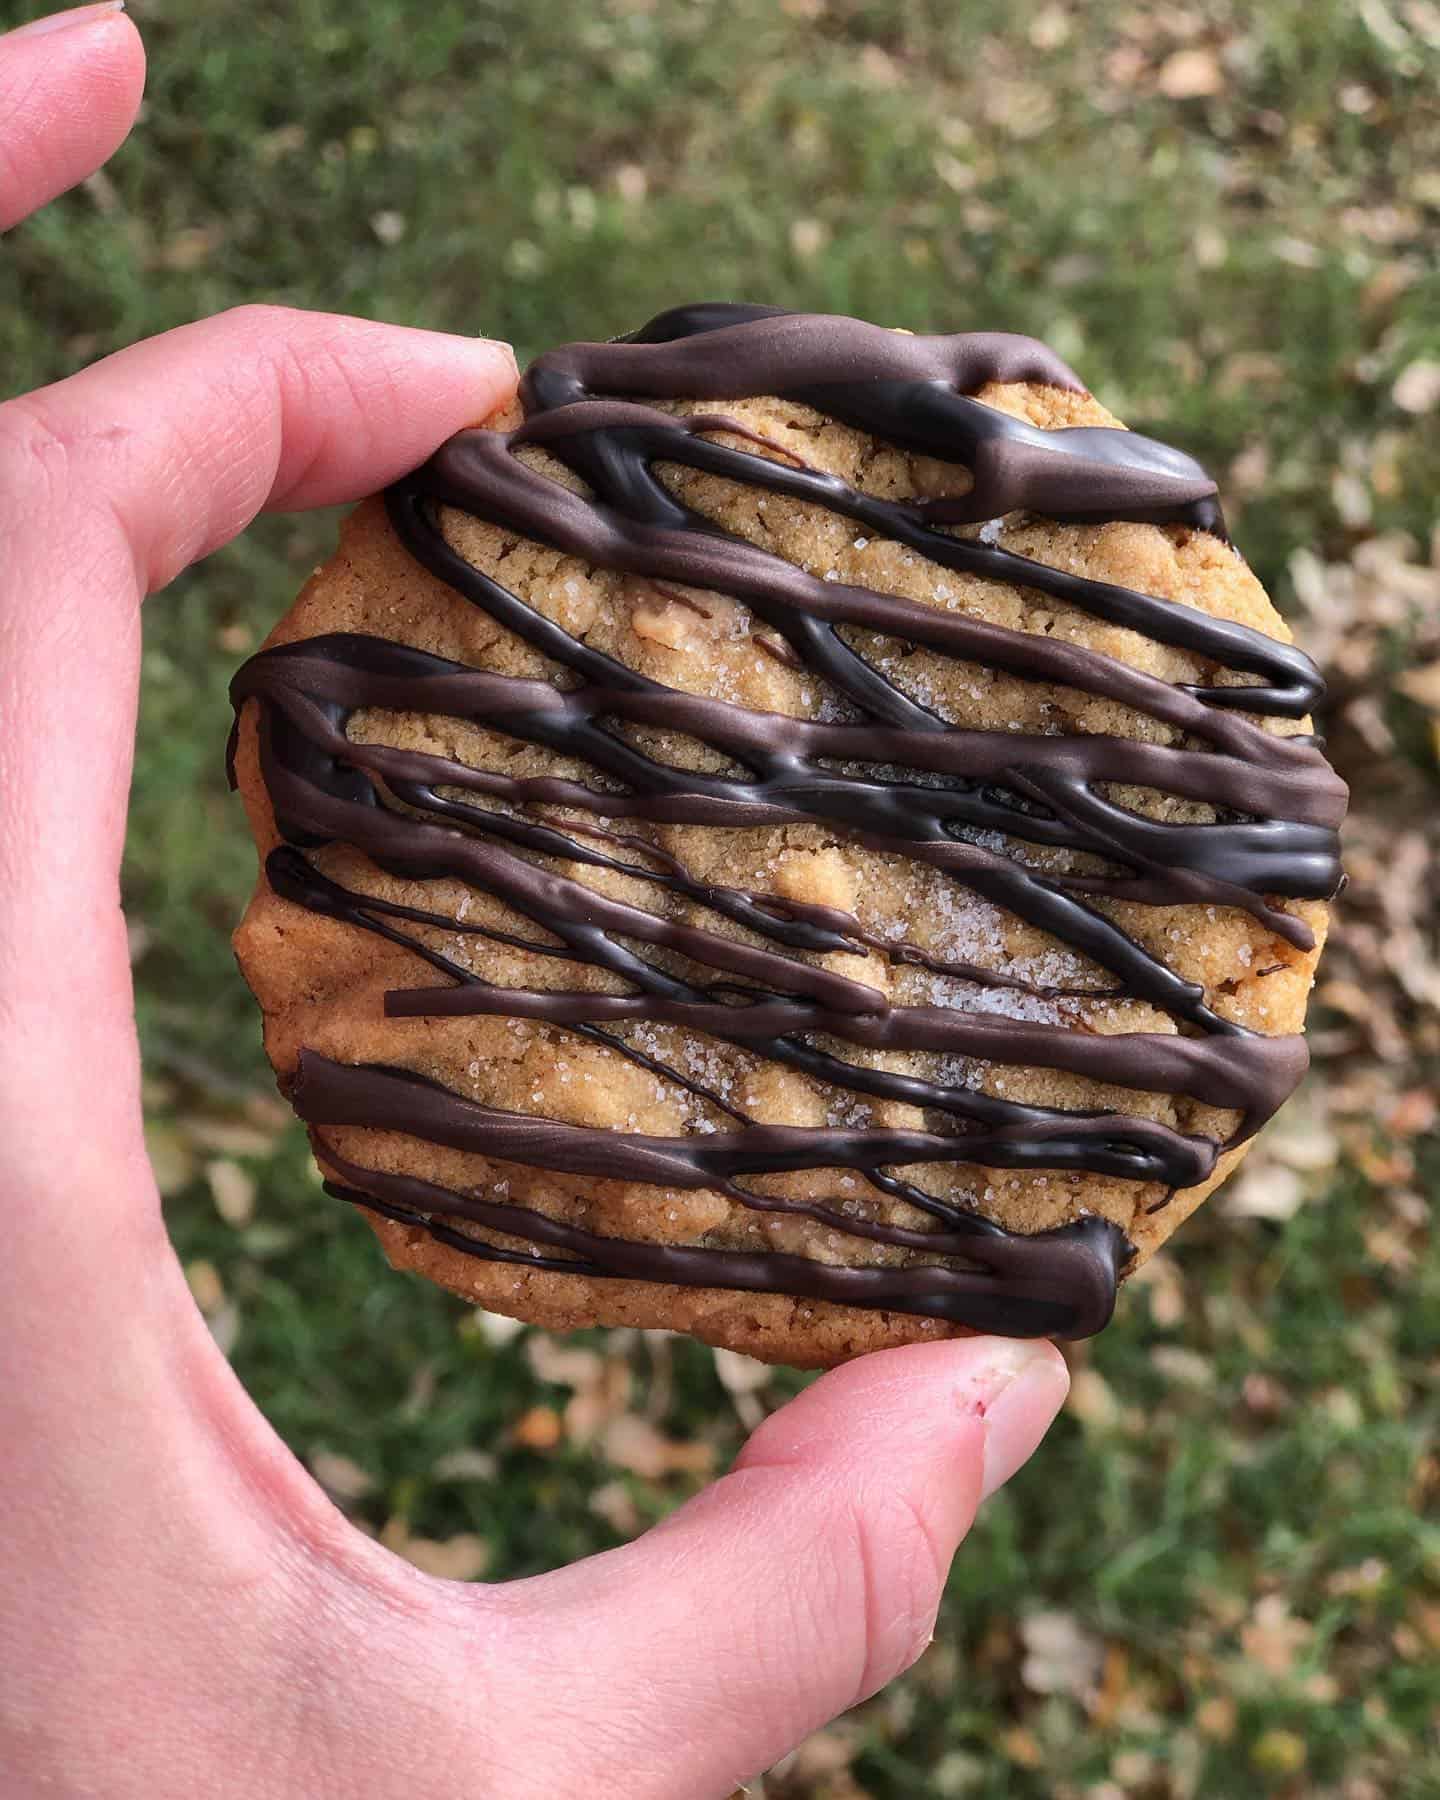 Peanut Butter cookies with dark chocolate drizzled on top 🤤. This is one of my favorite cookies out of my Christmas cookie box I made 🍪. It’s super simple and not from scratch but my goodness it tastes good!! Link in bio and story 👀👀
•
•
•
•
#cookies #cookiesofinstagram #peanutbutter #peanutbuttercookies #cookie #wifeofahunter #fueledbynature #wifeofahuntercooks #woah #dessertrecipe #wewillnotbetamed #foodiegirl #reeses #darkchocolate #cookies🍪 #chocolatecookies #foodblogger #foodofinstagram #foodielife #deliciousfood #cheatmeal #chocolatecookie #ilovefood #foodielife #dessertsofinstagram #cookiesofig #foodiesfeed #desserts #dessertporn